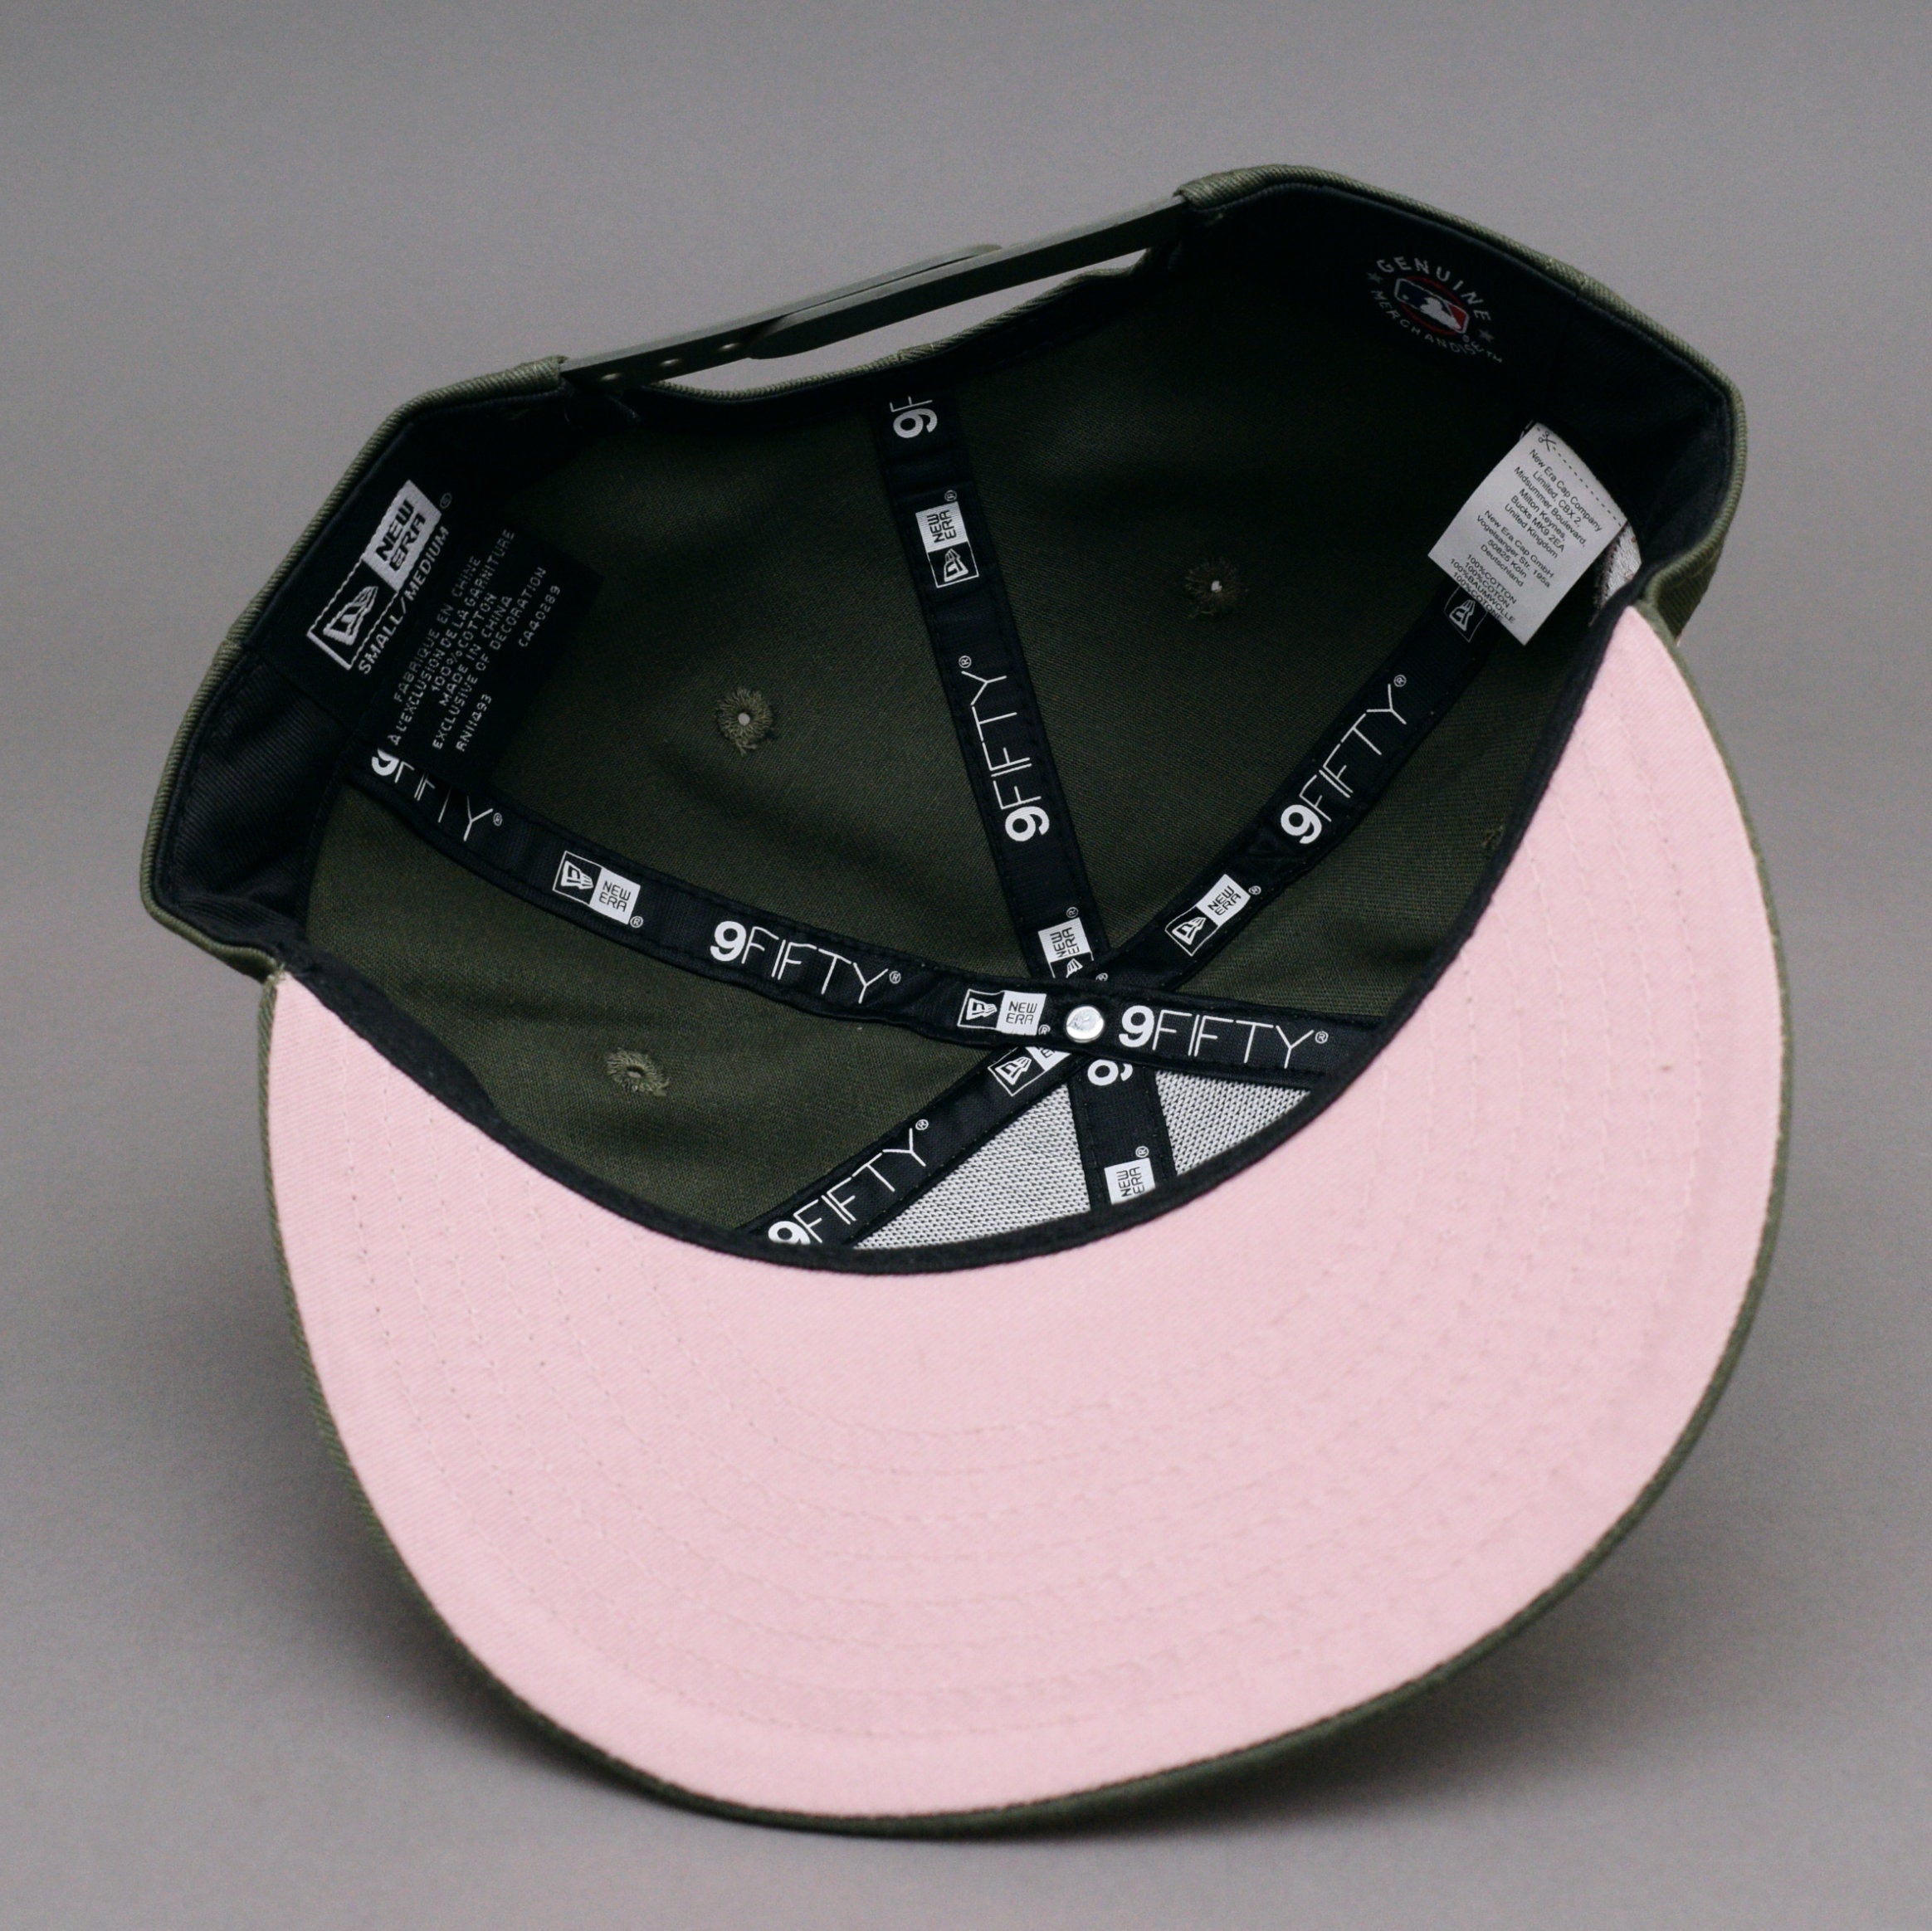 New Era - Chicago White Sox 9Fifty Side Patch Medium - Snapback - Olive/Pink